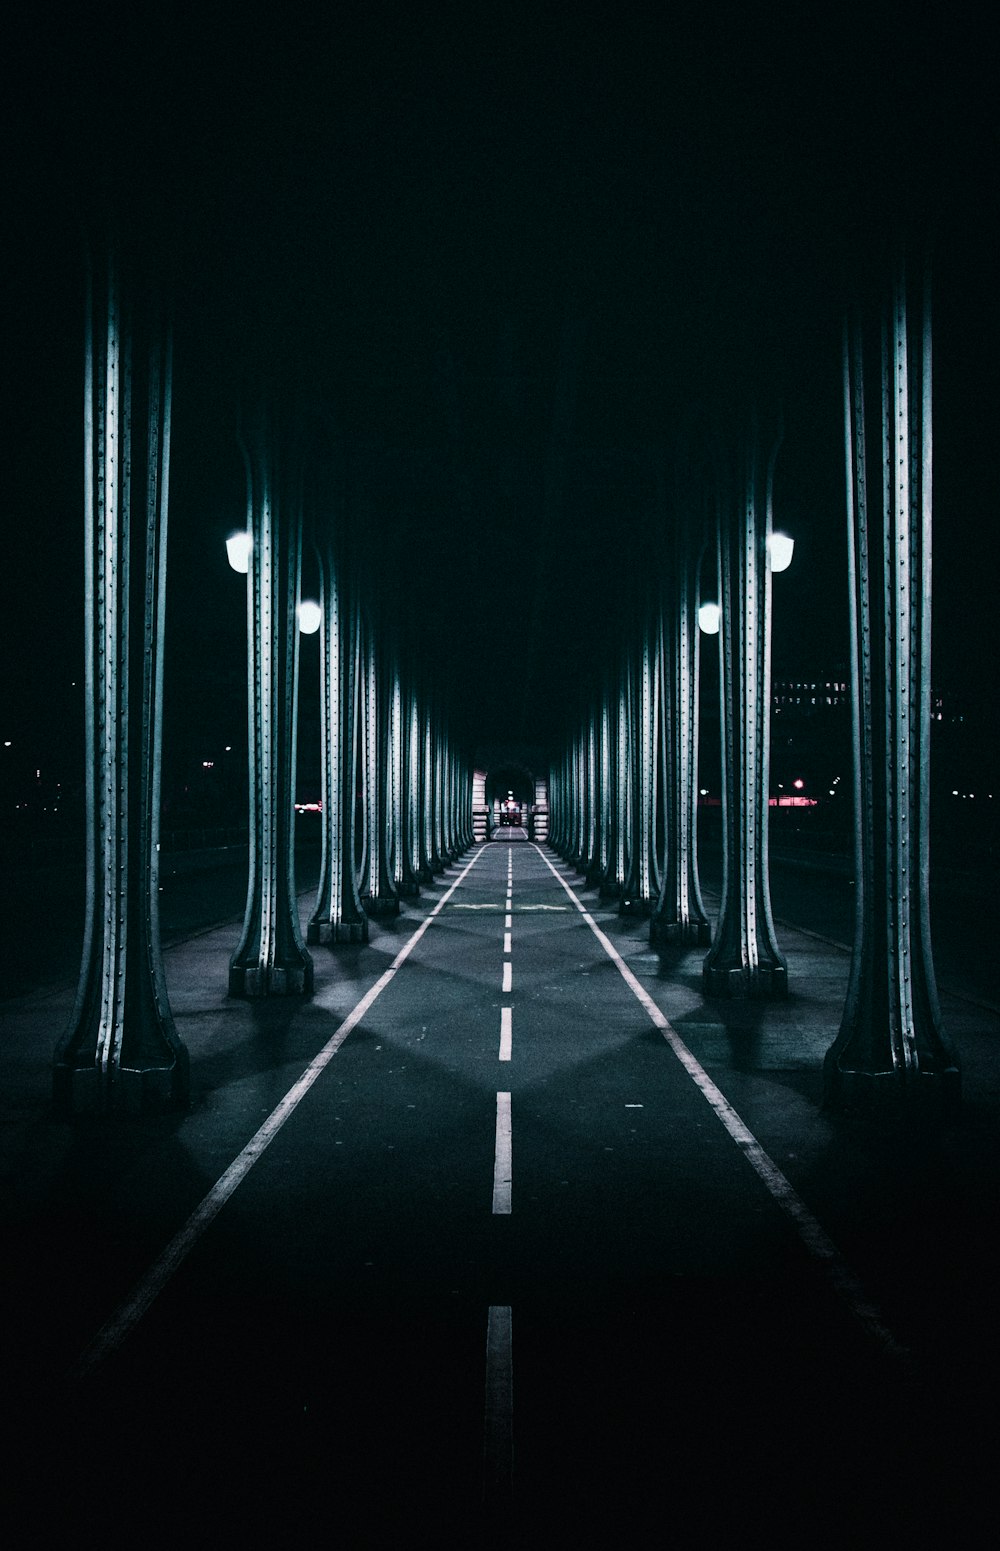 a dark street with a long line of street lamps